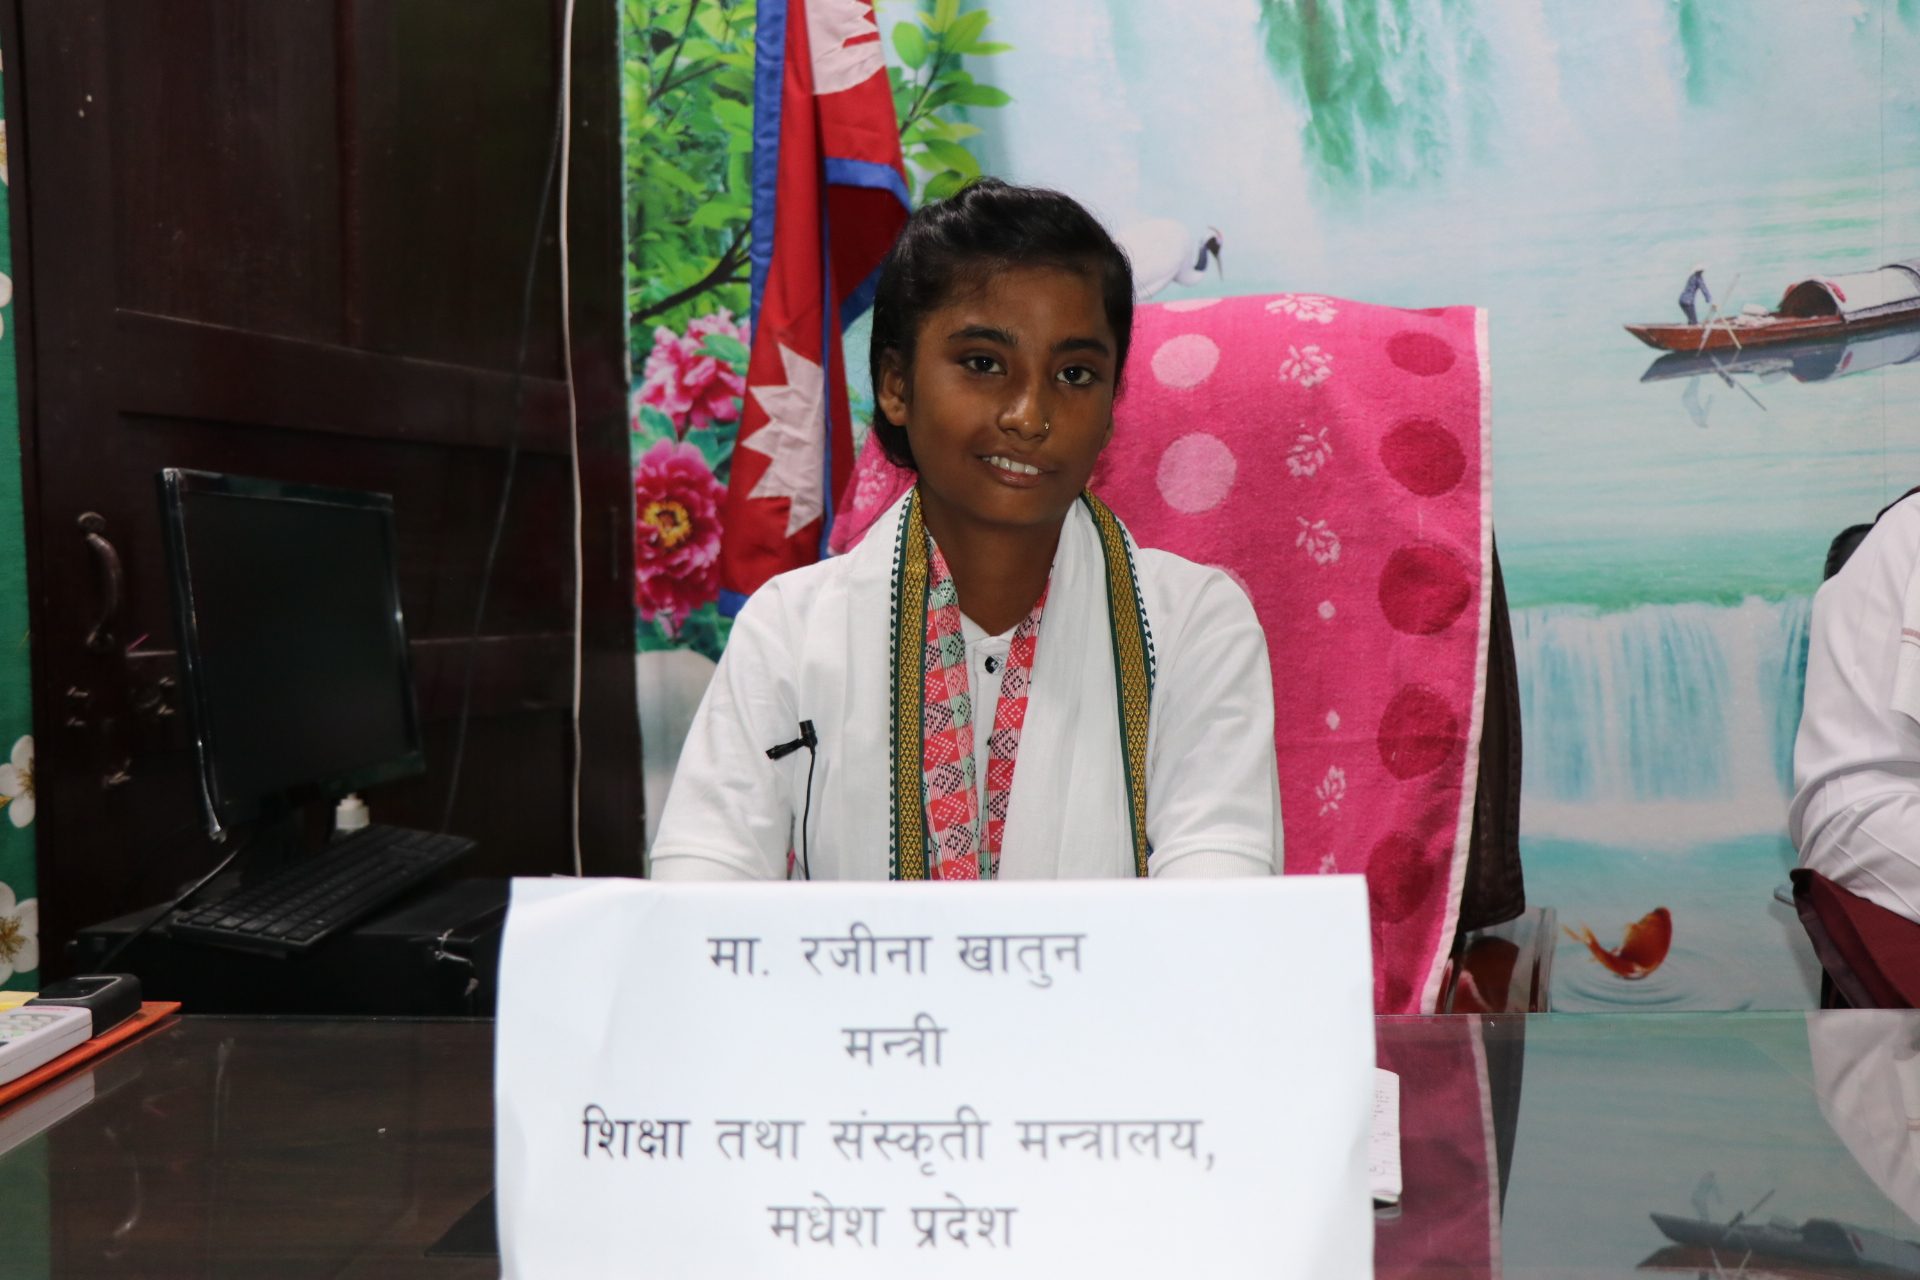 Rajina smiling and posing with her name as Minister of Education and Culture. 